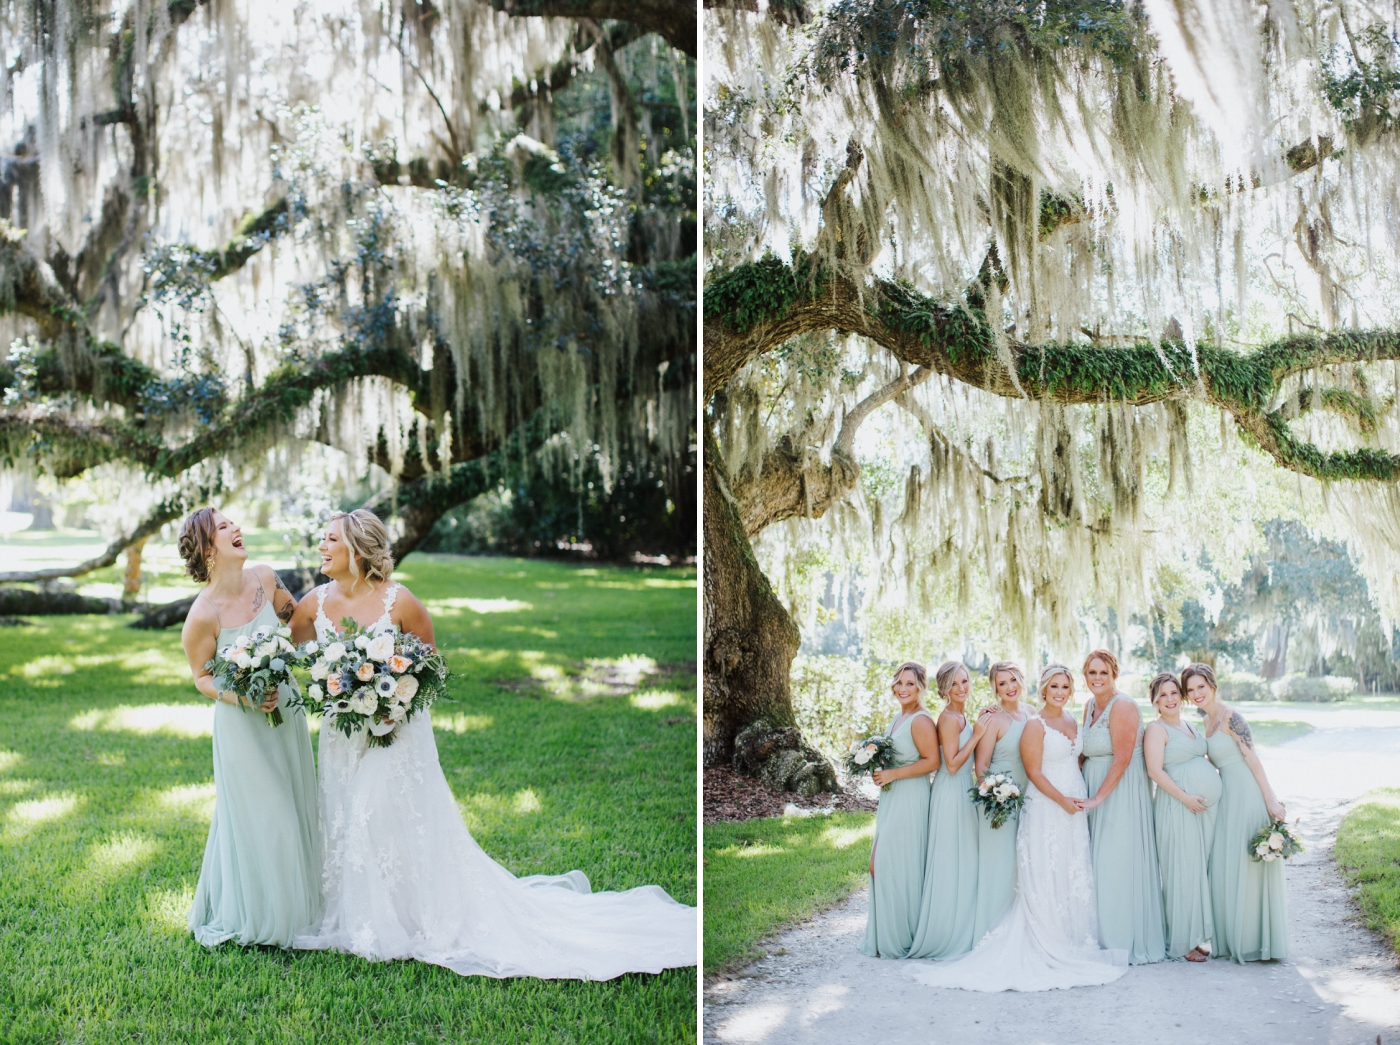 Bridesmaids in mint green chiffon gowns